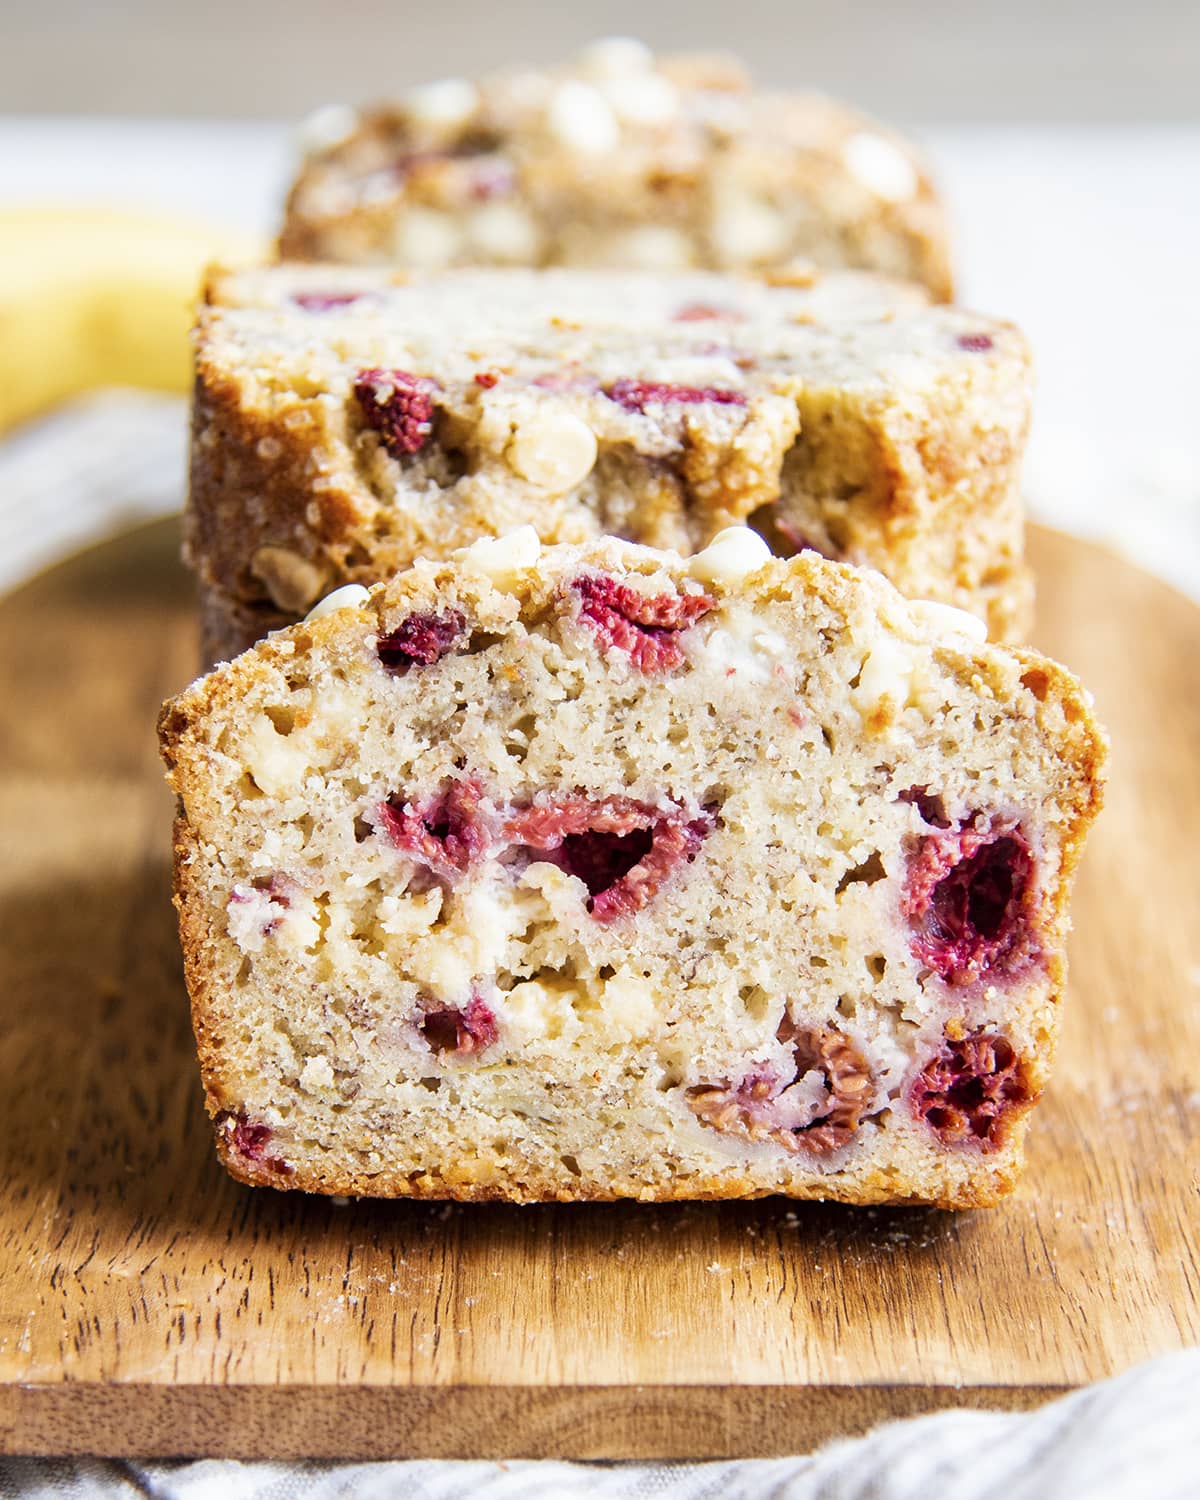 A slice of banana bread with raspberries and white chocolate chips.